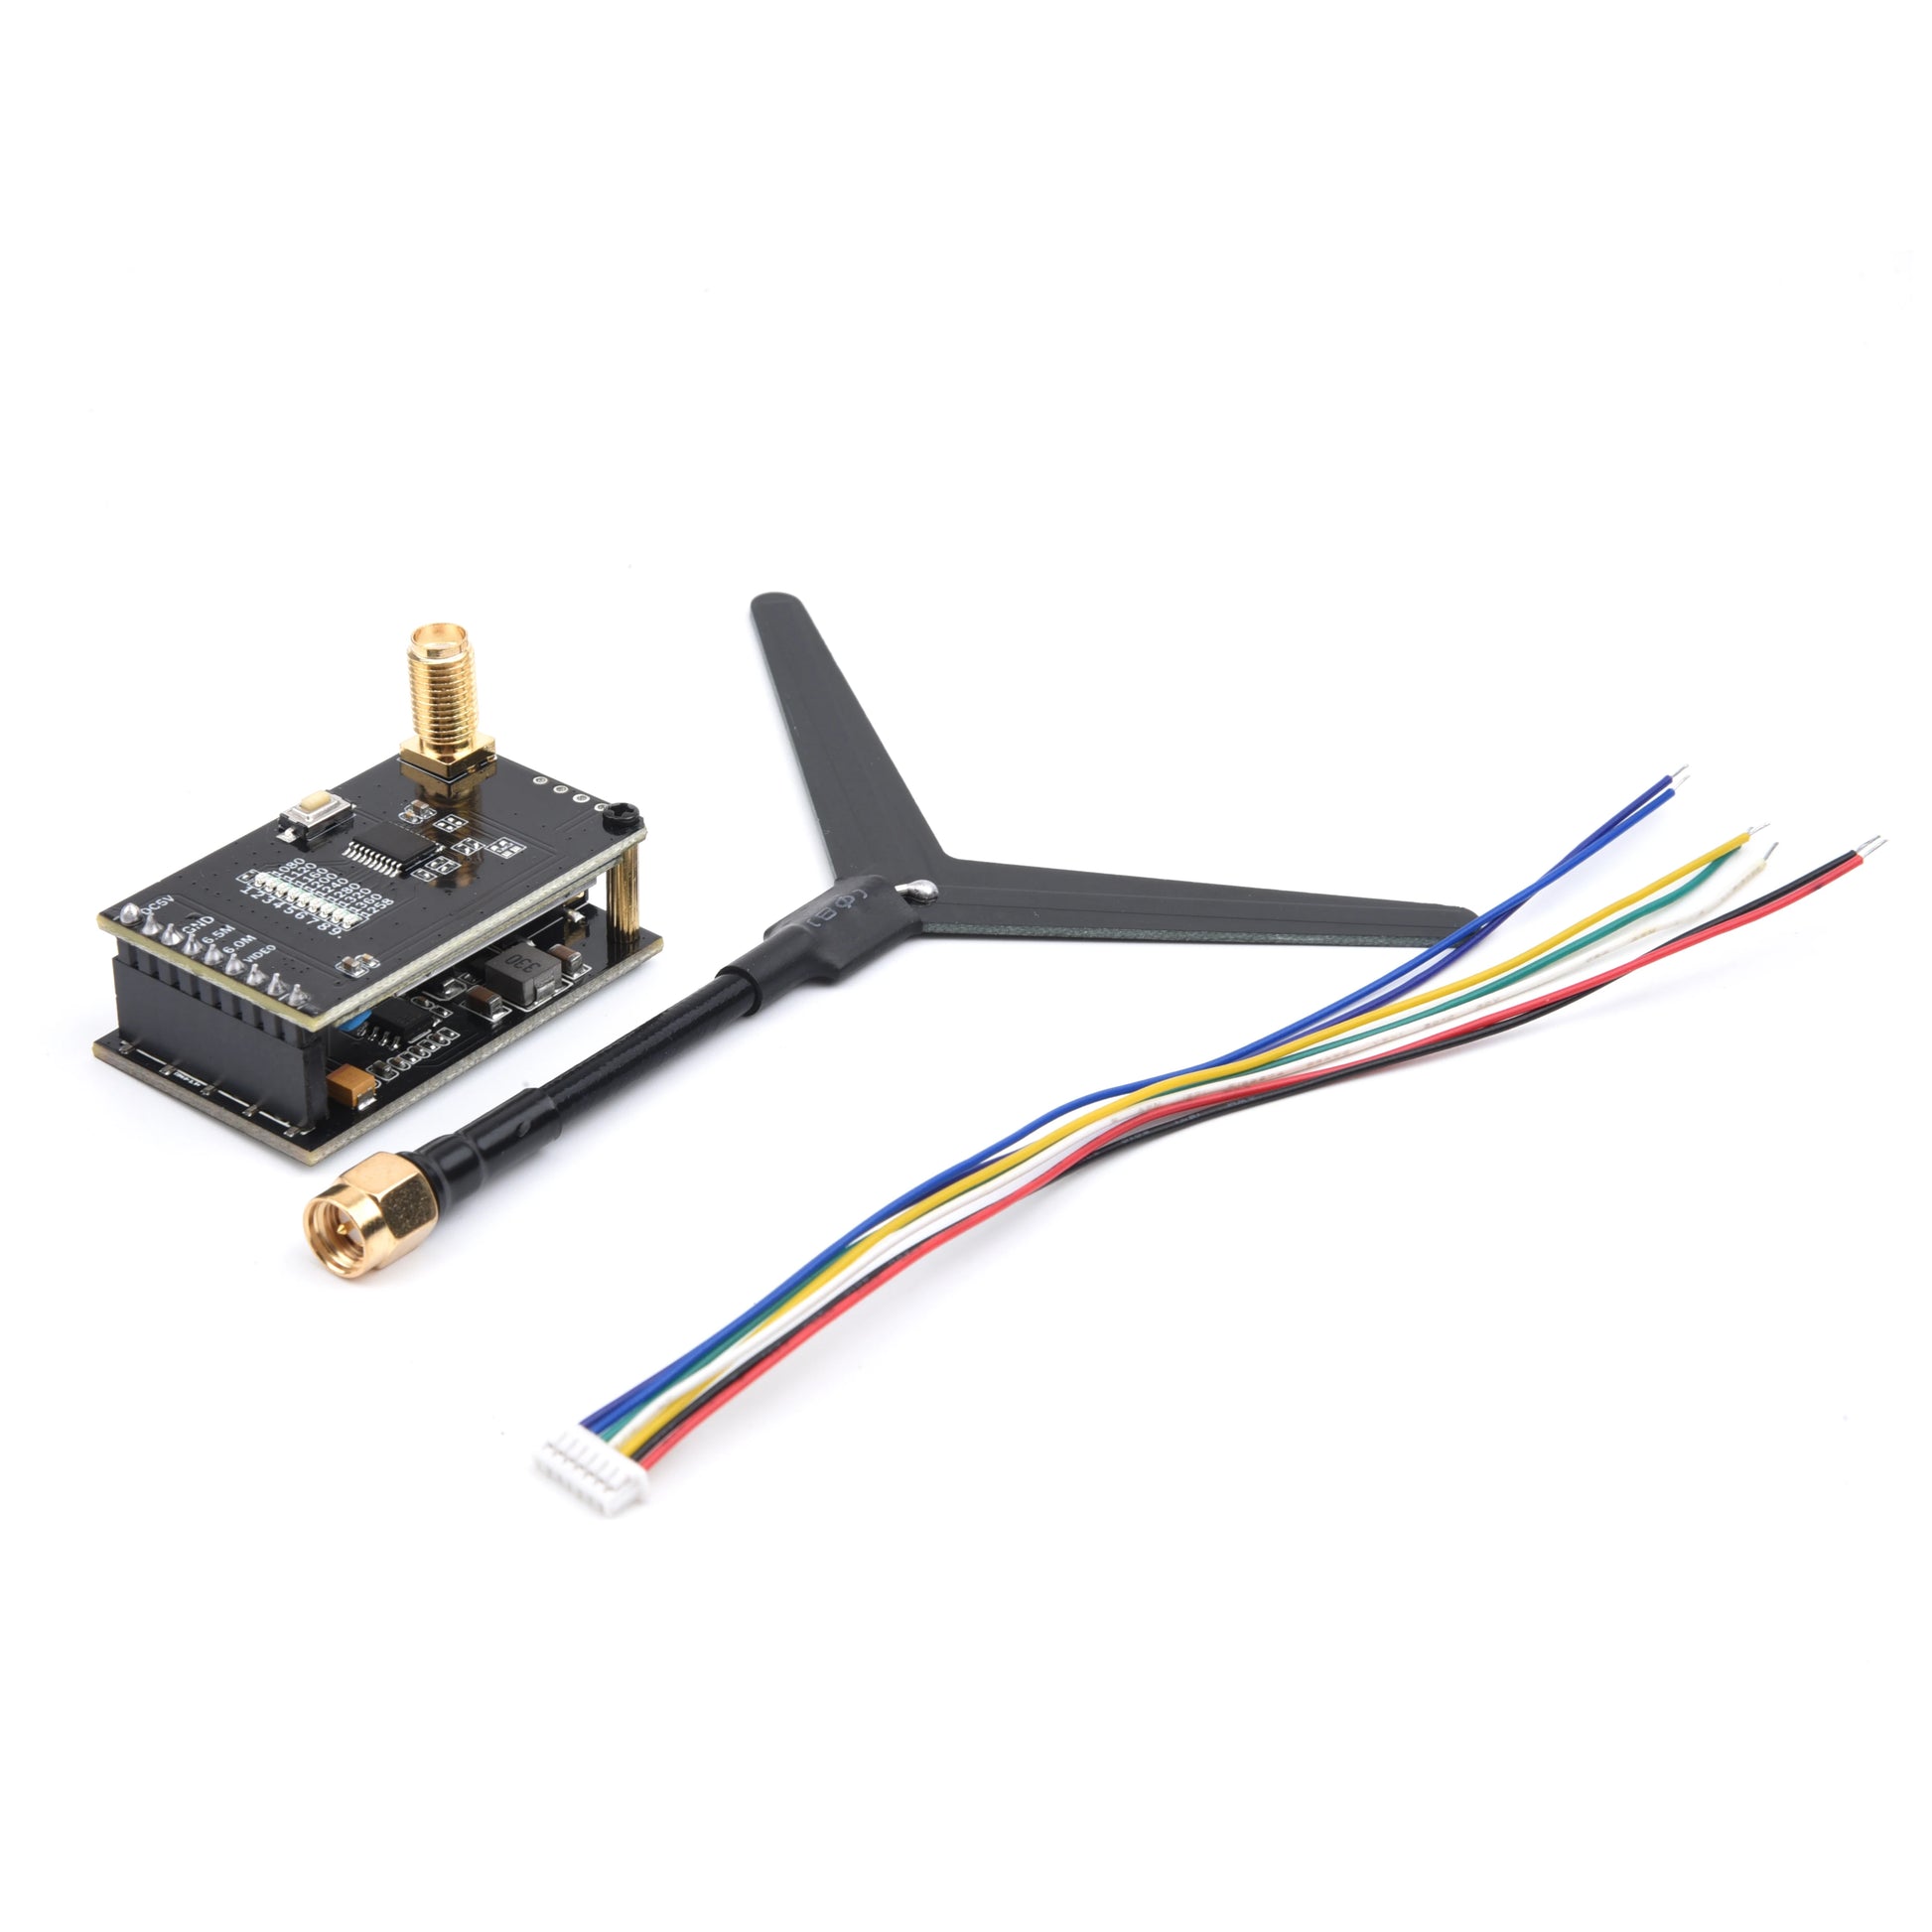 1.2G 0.1mW/25mW/200mW/800mW VTX & VRX - 9CH Transmitter Receiver FPV Video System Combo for RC Models Drone Quad Enhancement Booster